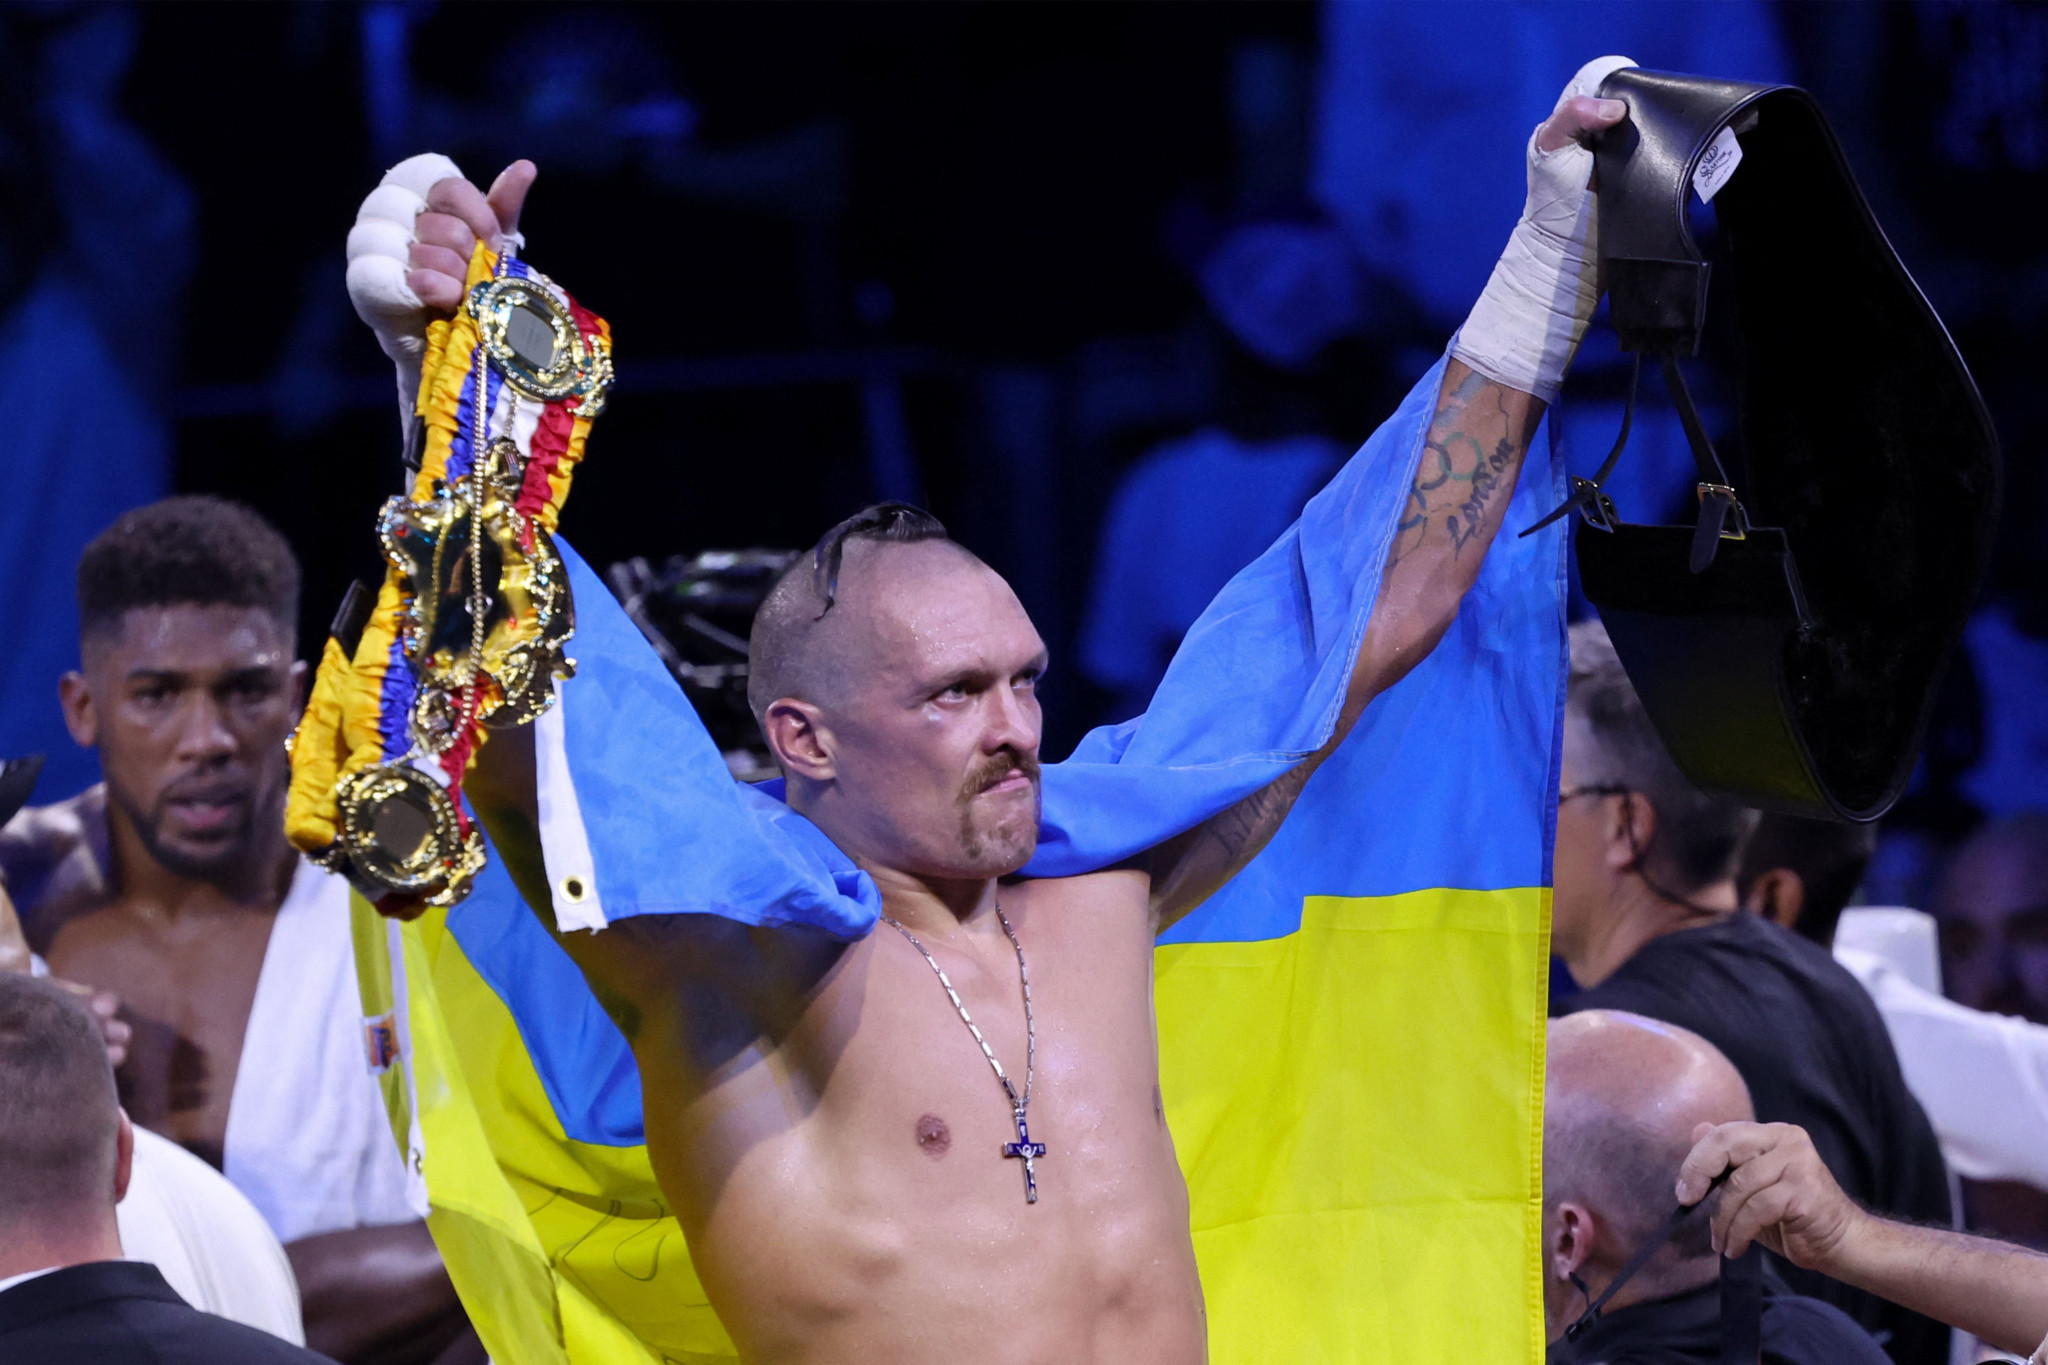 World heavyweight boxing champion hopes for "victory" and "peace" in Ukraine in 2023